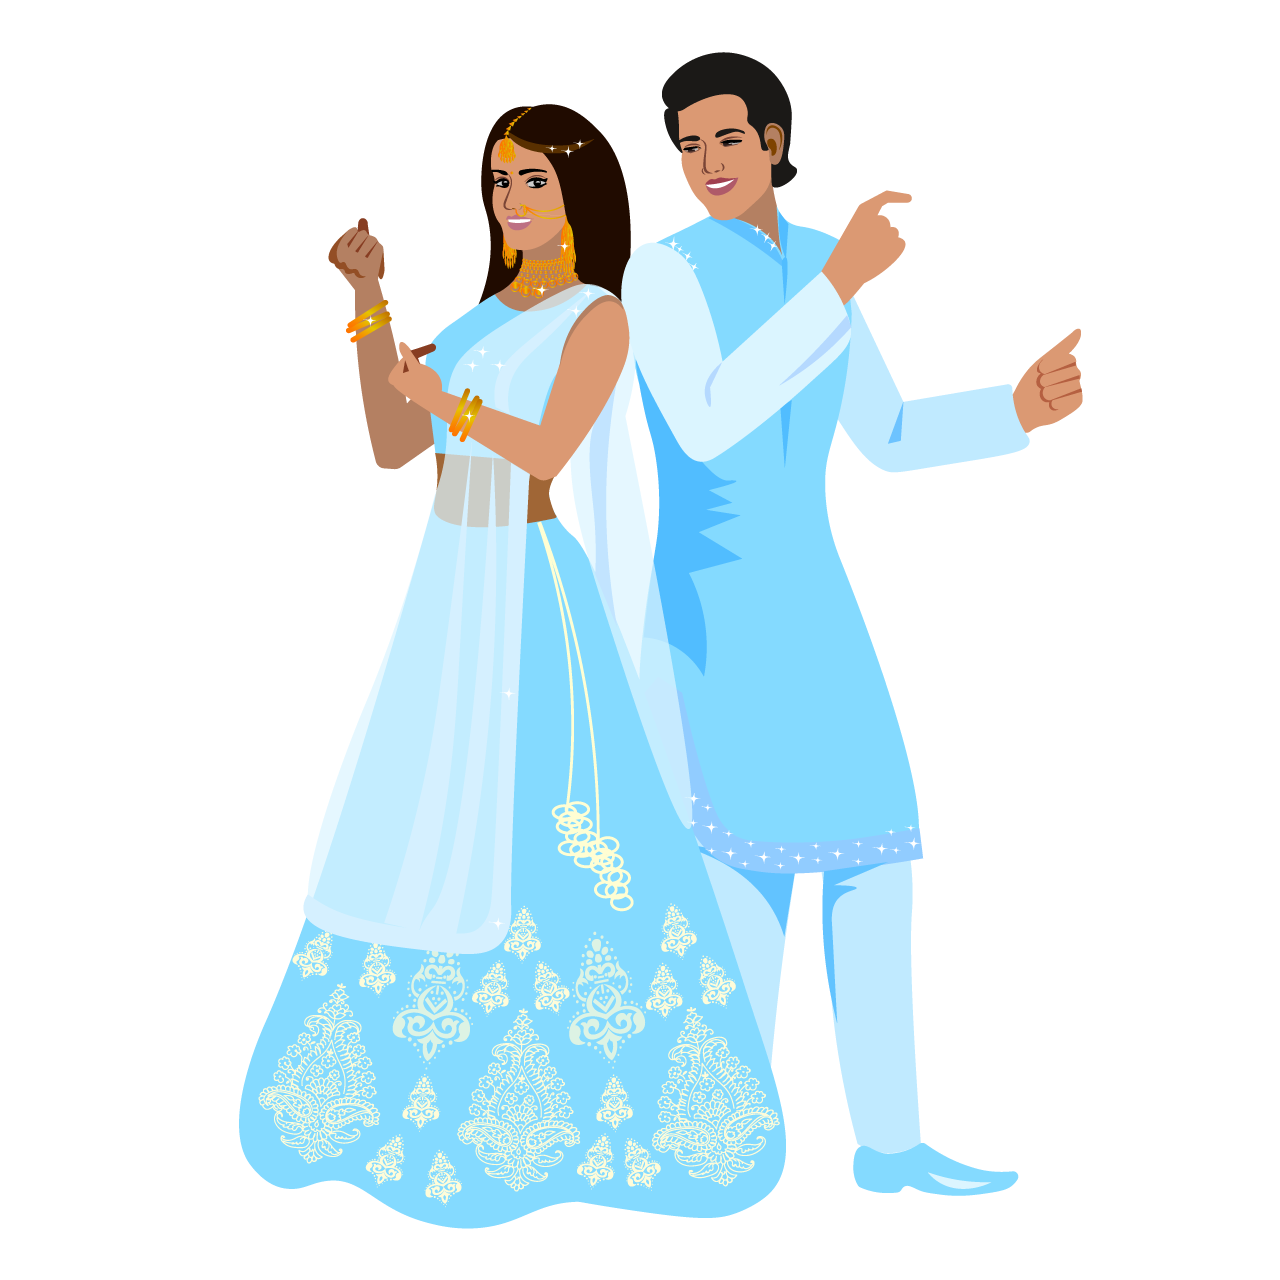 Indian wedding couple traditional cartoon illustration image hand drawing sketch